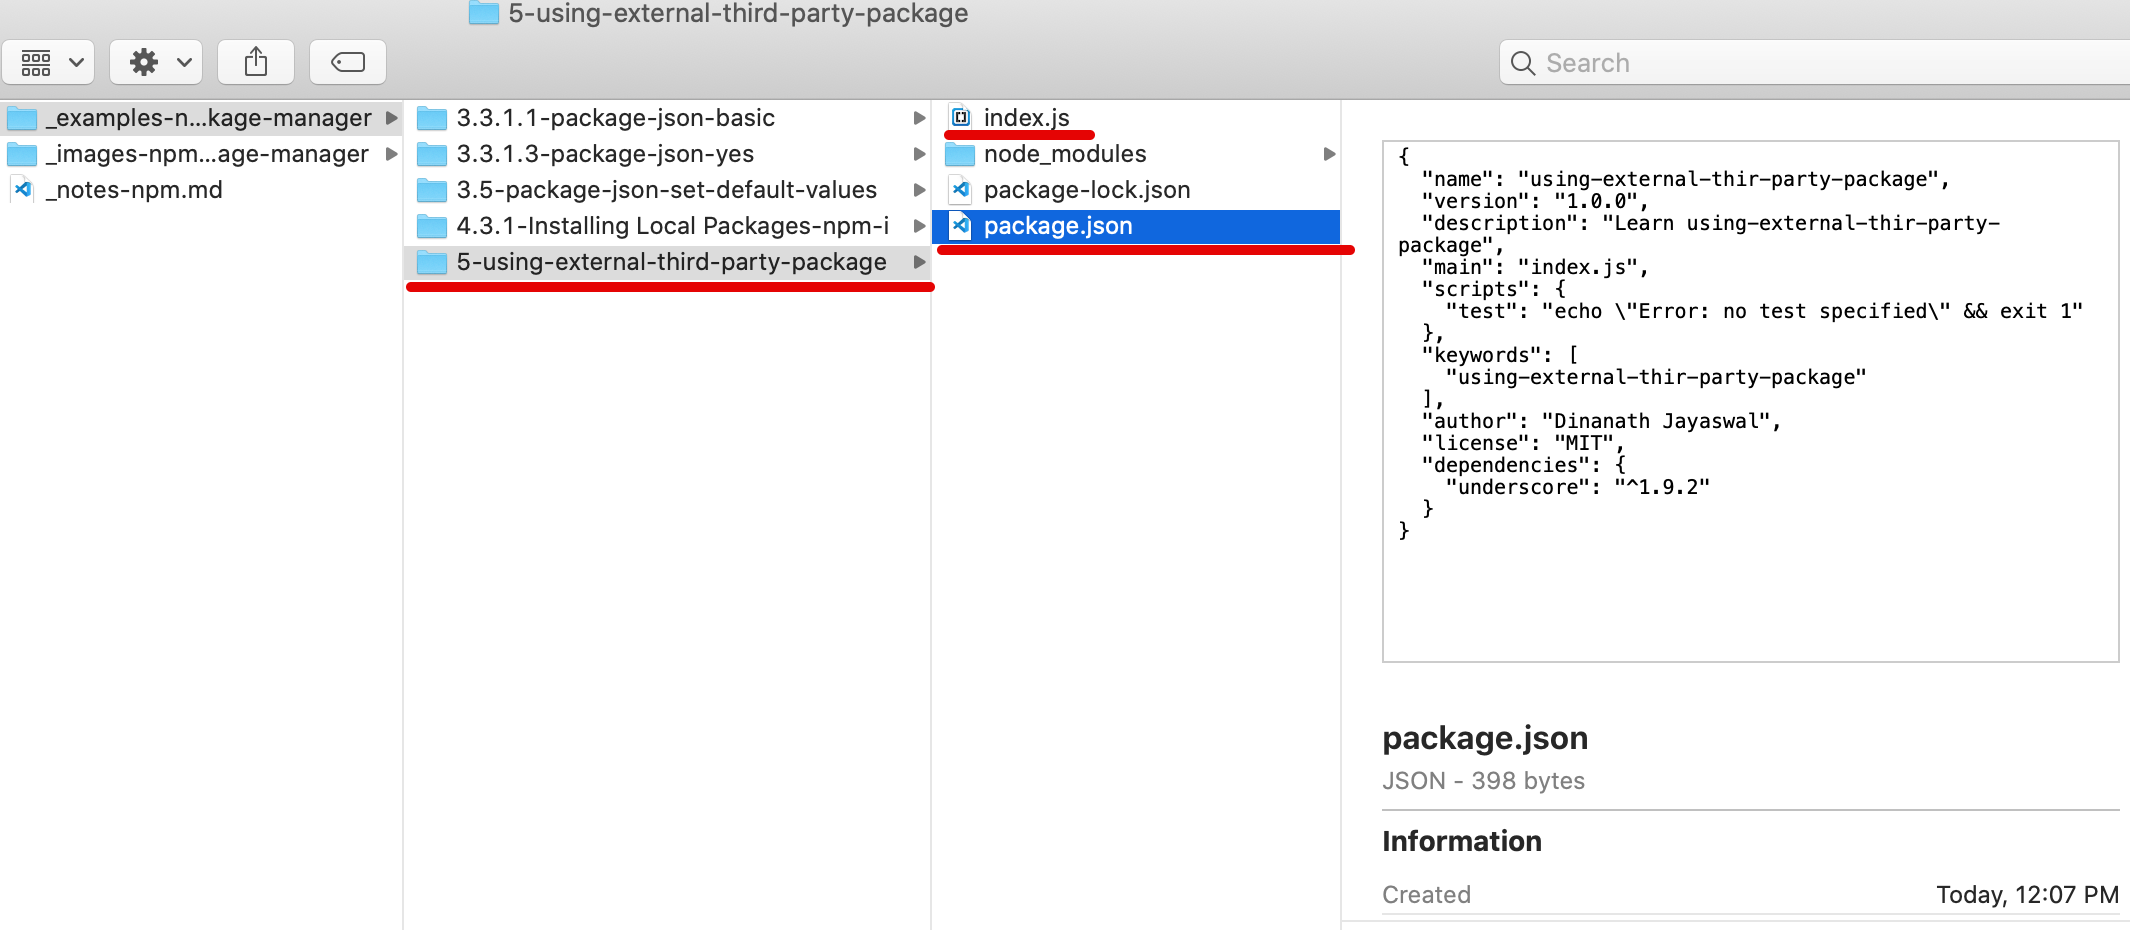 Using a Extermal Third Party Package: Folder Structure